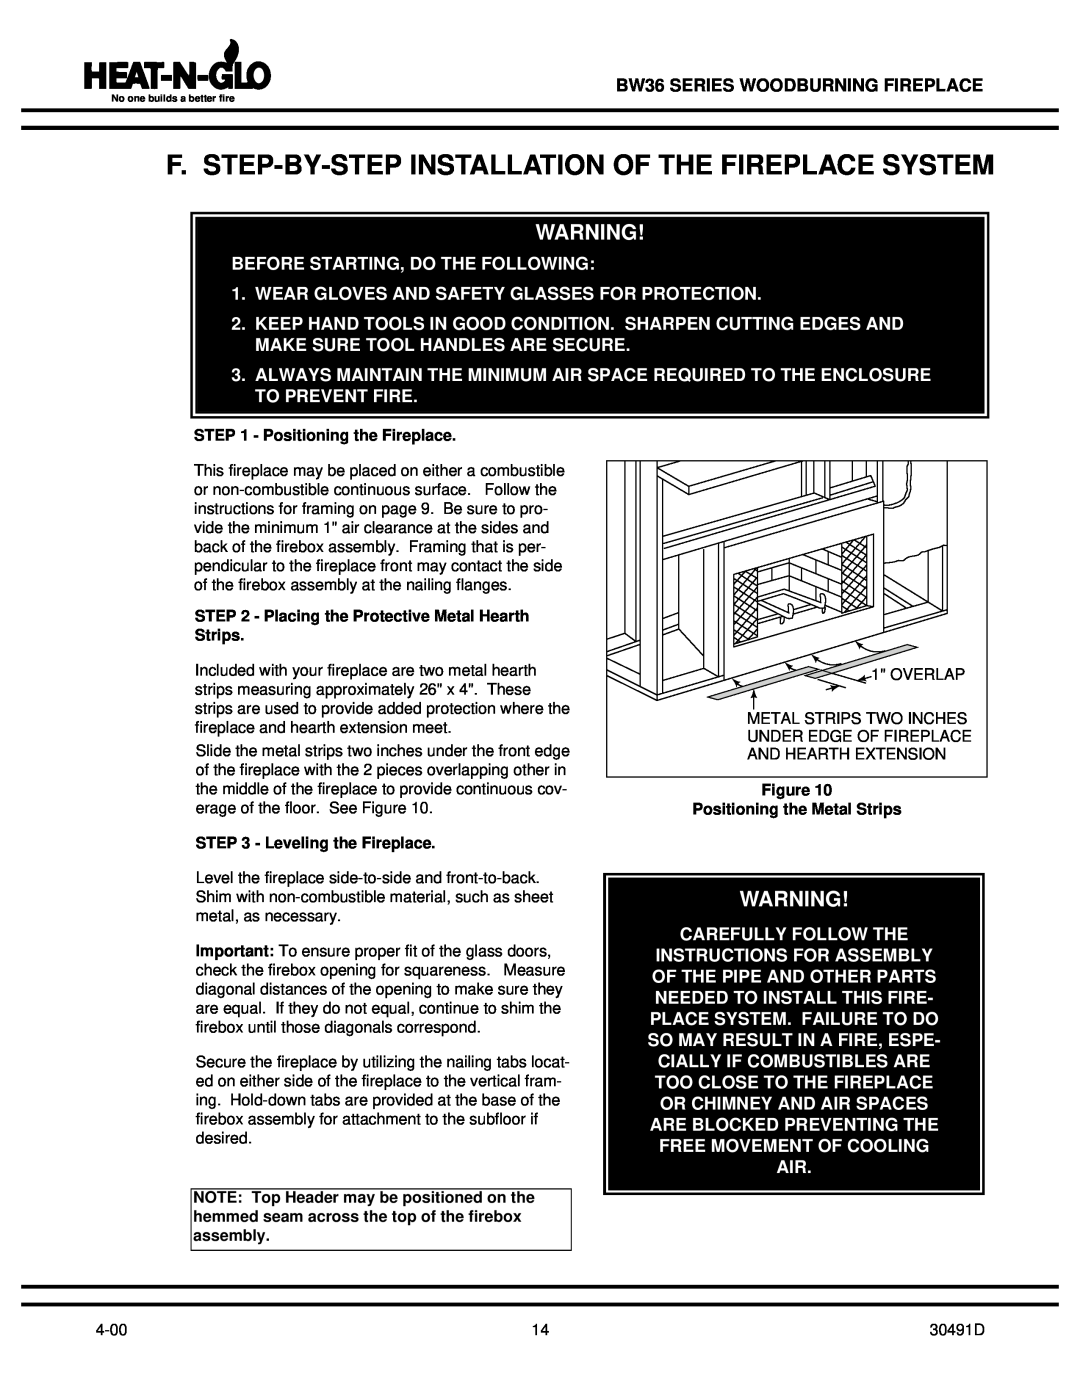 Heat & Glo LifeStyle operating instructions BW36 SERIES WOODBURNING FIREPLACE, Before Starting, Do The Following 